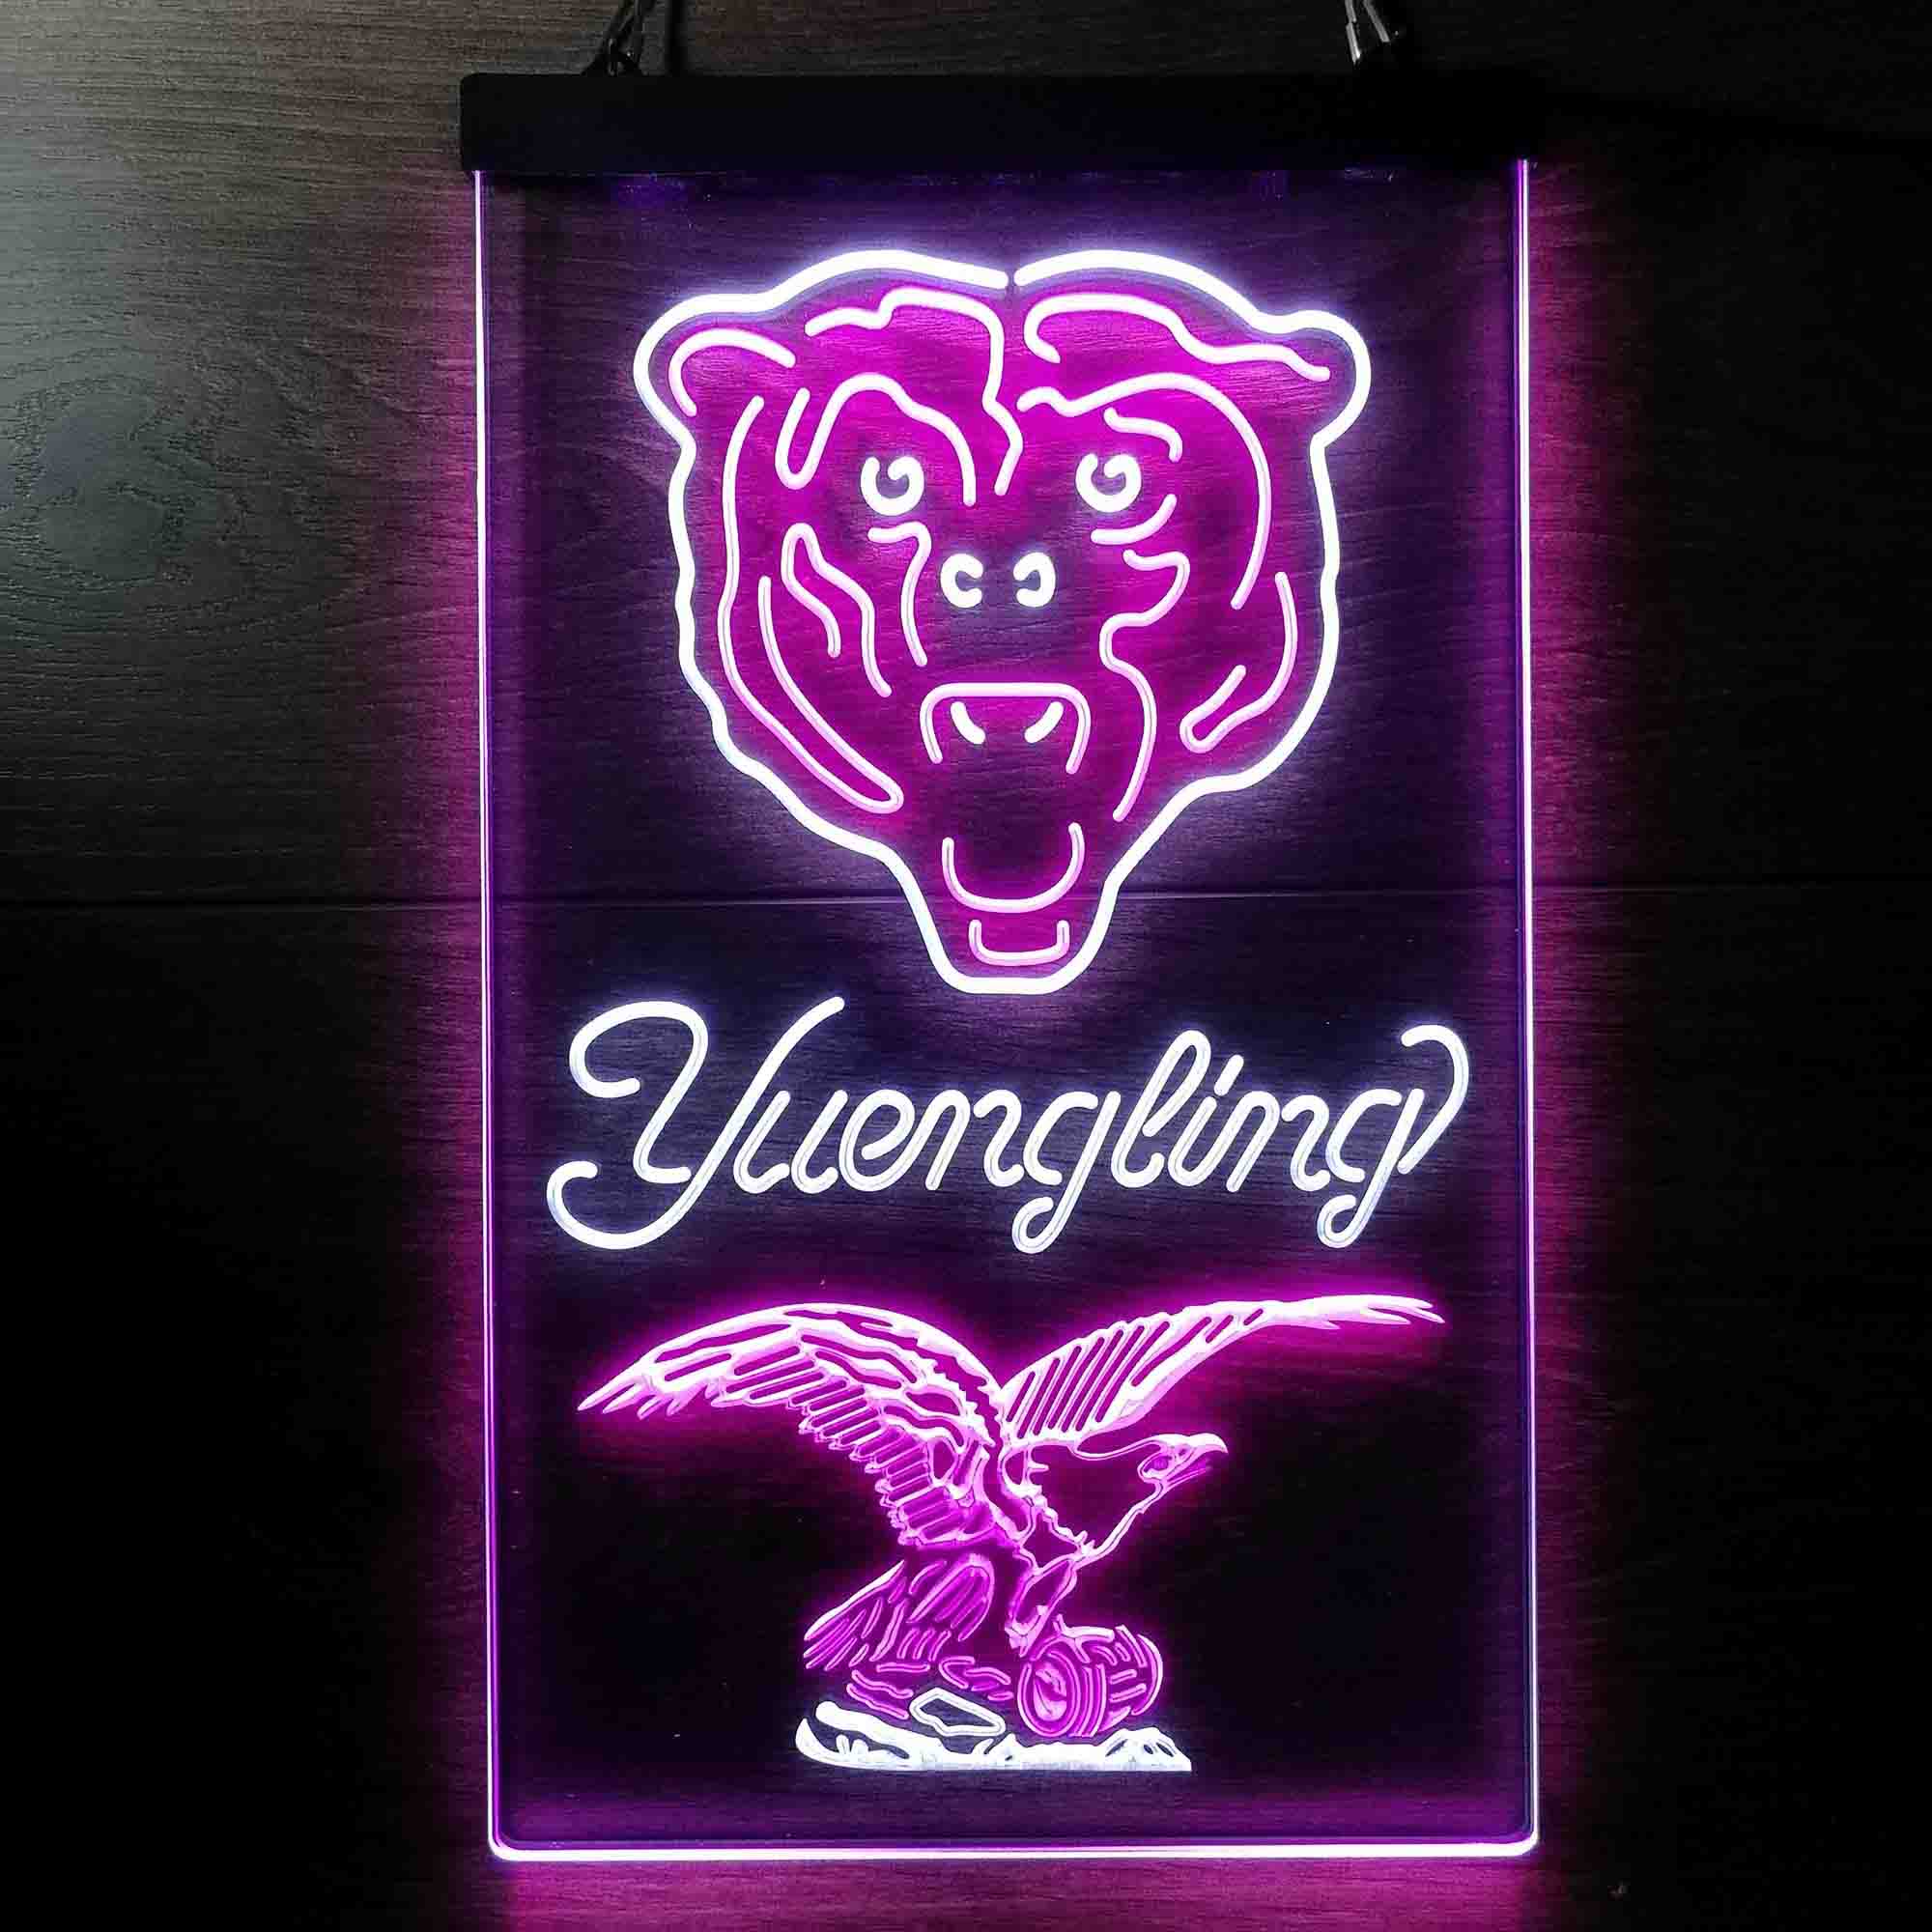 Yuengling Bar Chicago Bears Est. 1920 LED Neon Sign